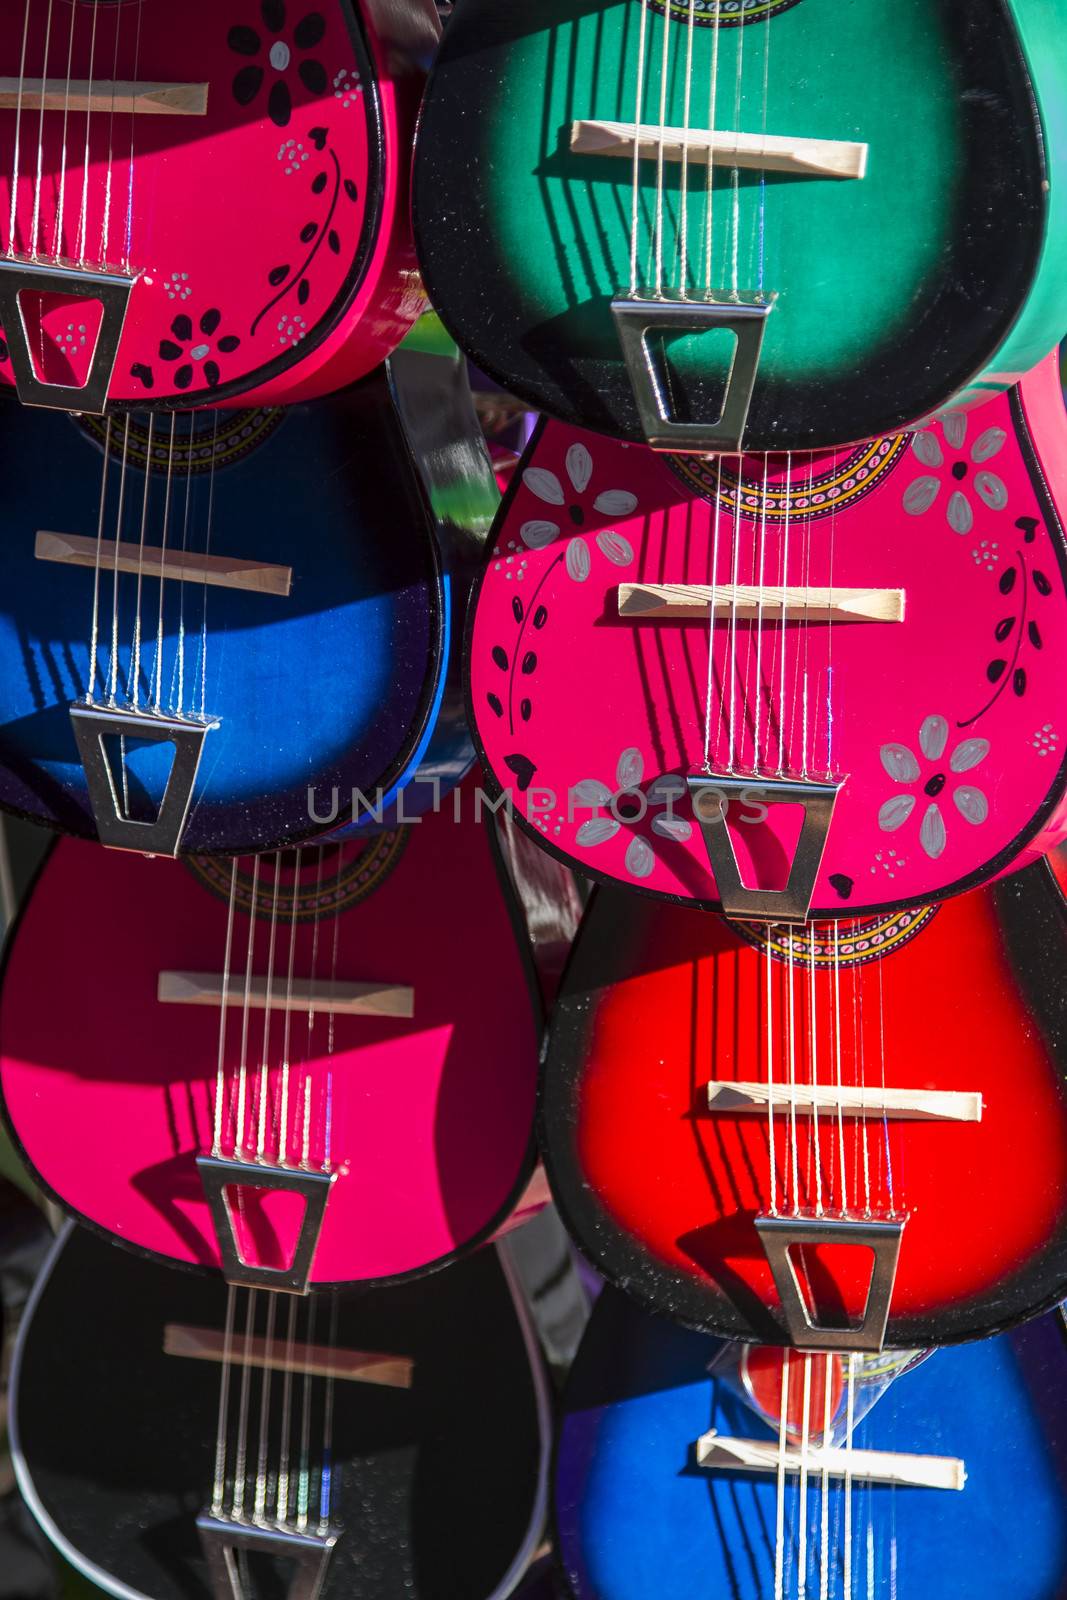 display of colorful toy guitar